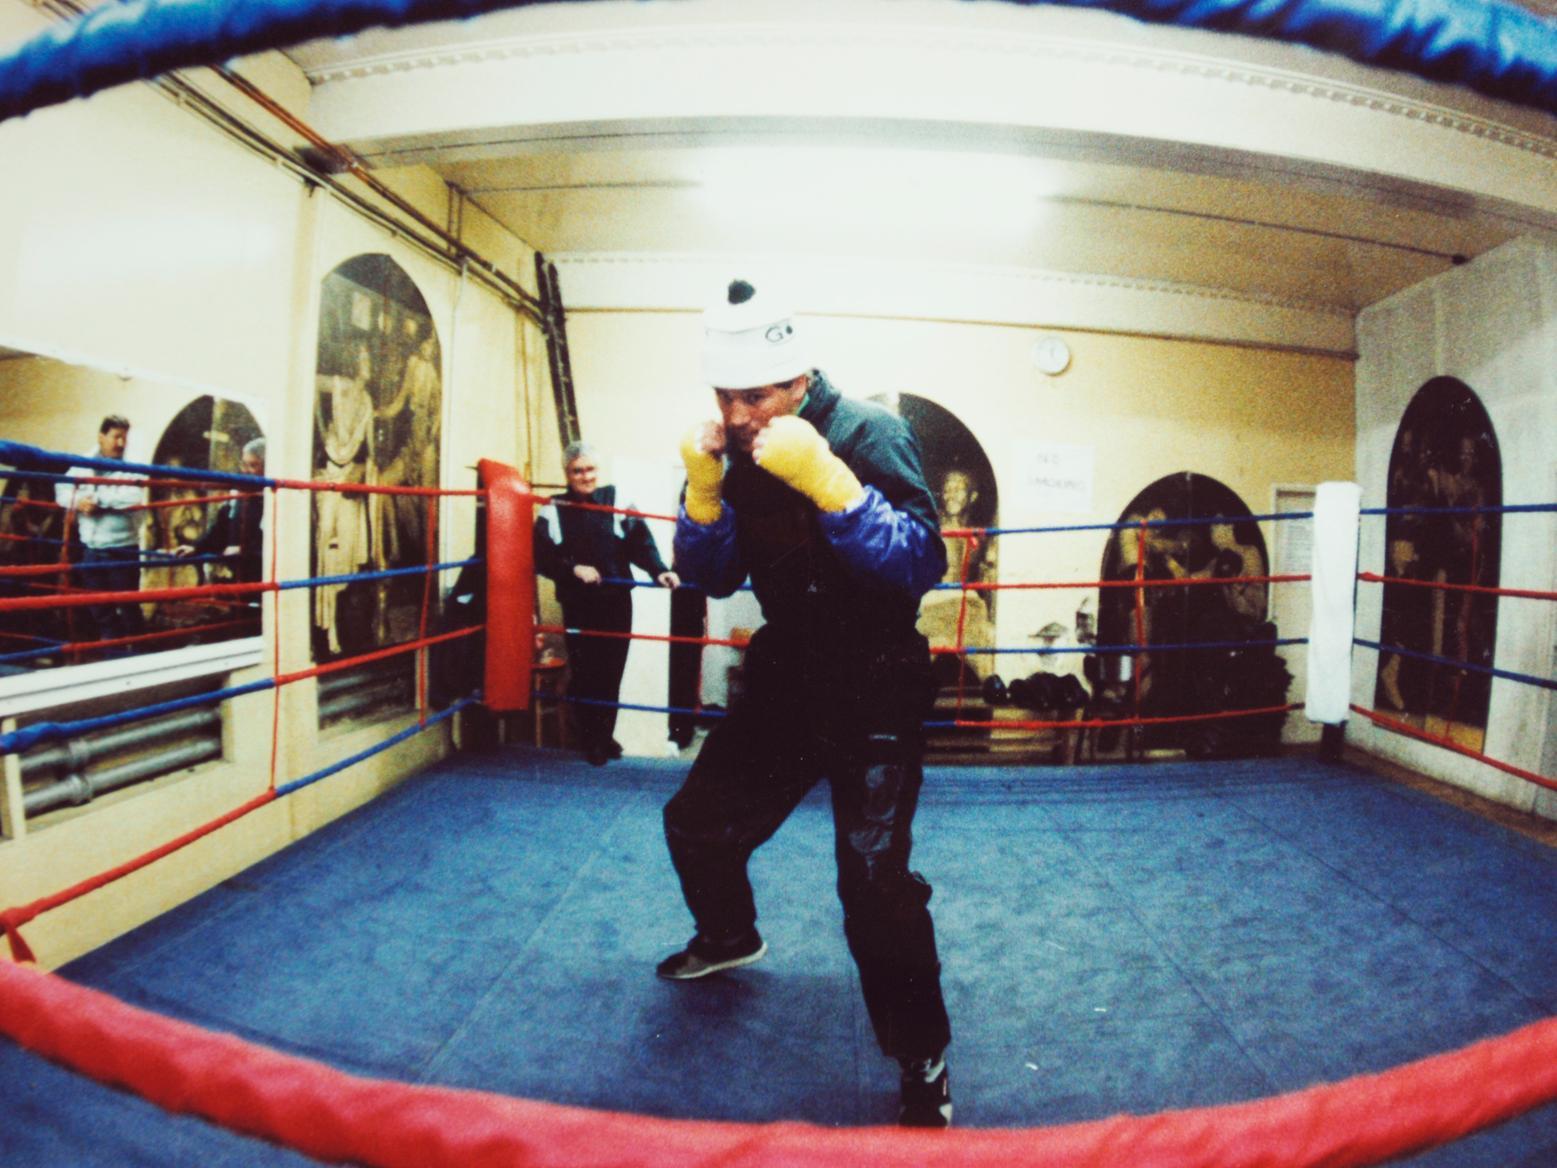 Leeds boxer Henry Wharton was hard at work in the gym ahead of his latest bout.